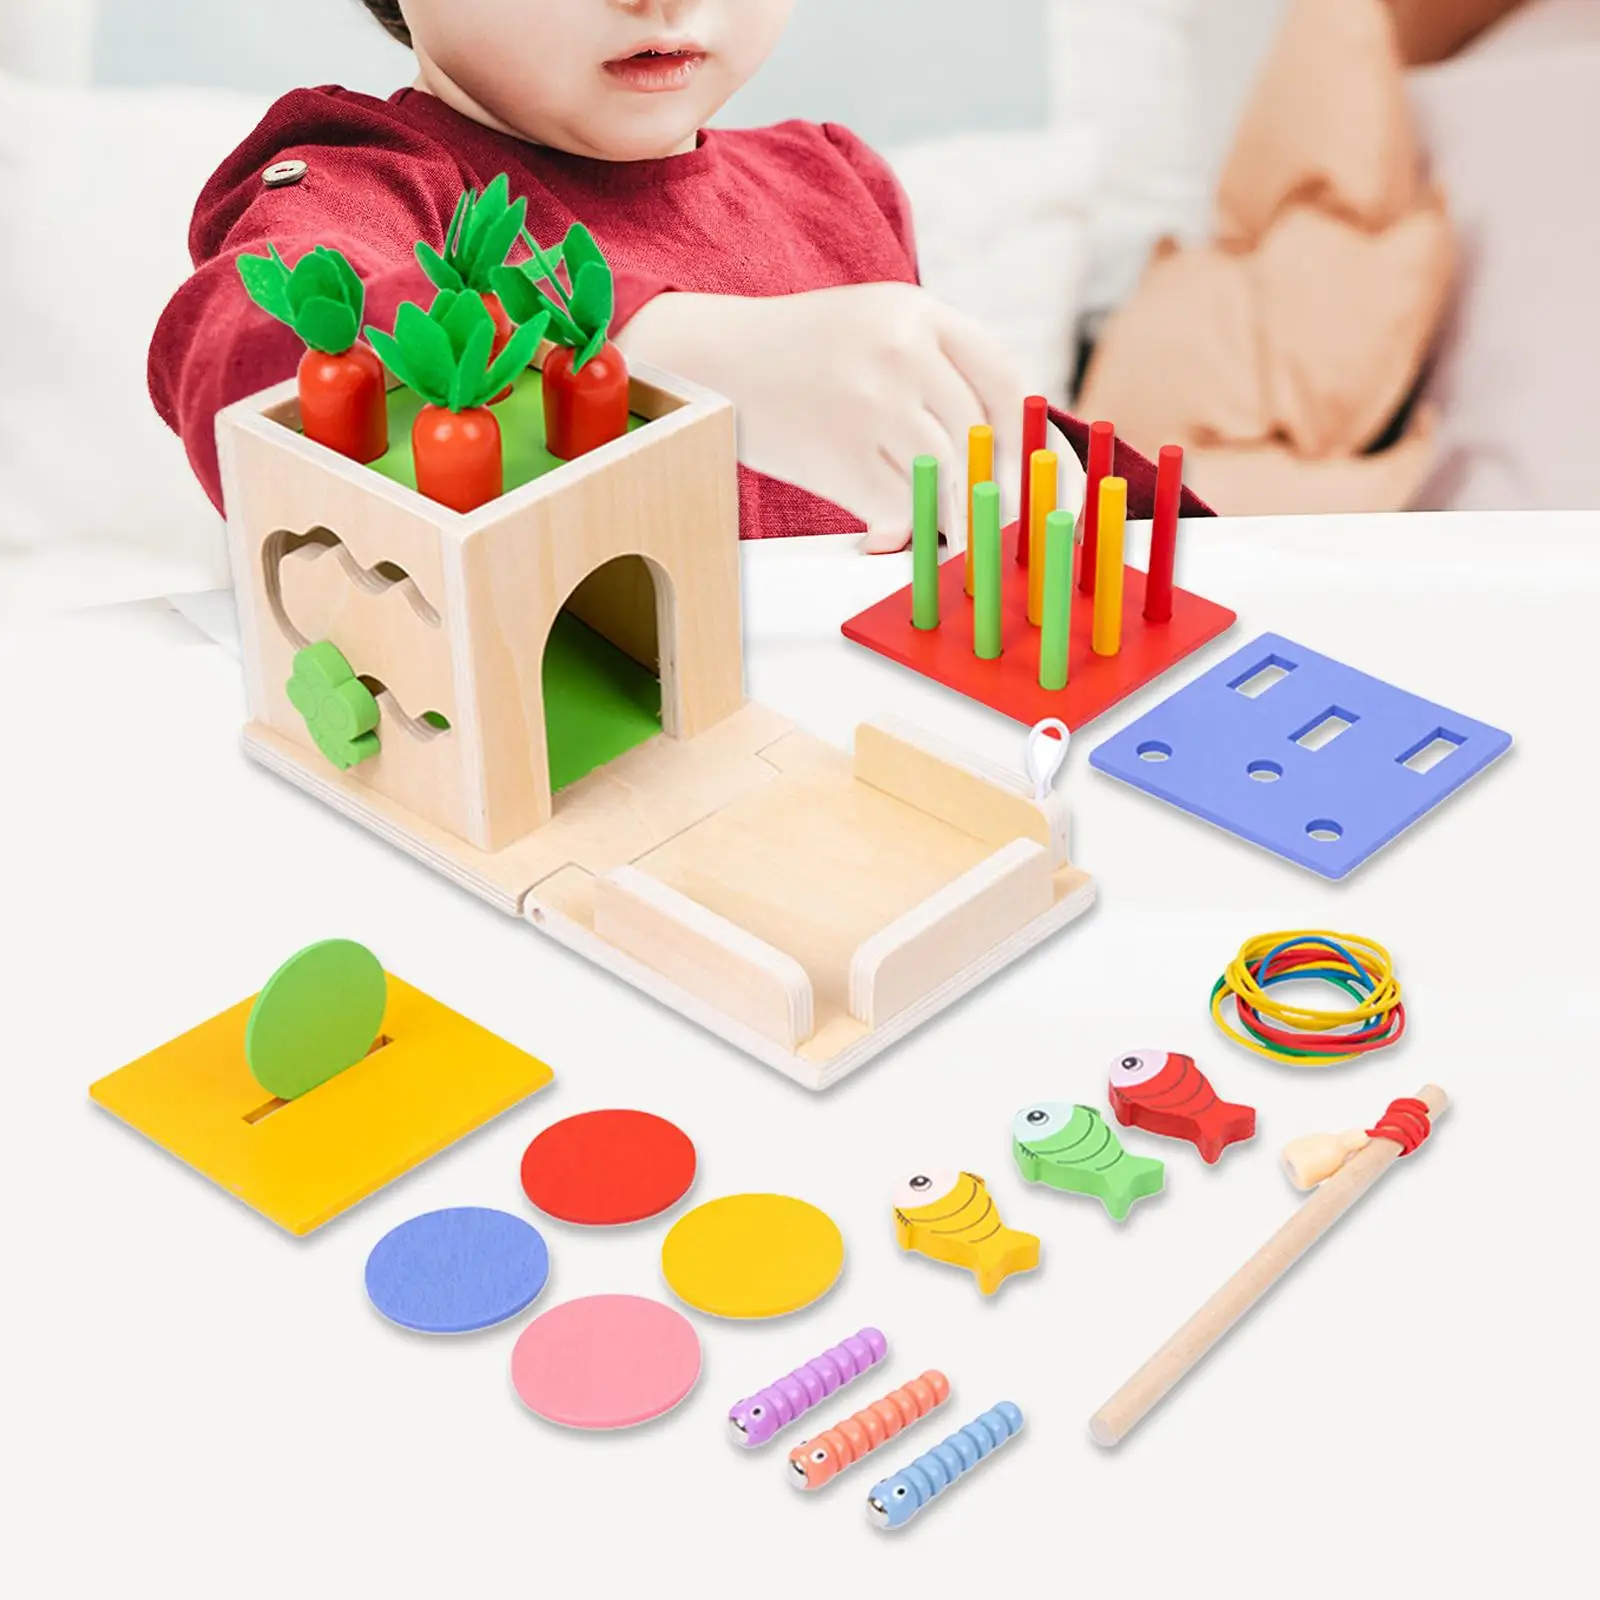 Montessori Toddler Play Kit Montessori Coin Box Gear Wooden Toy Box Set Educational Toys for 1 2 3 Year Old Baby Girls Boys Gift